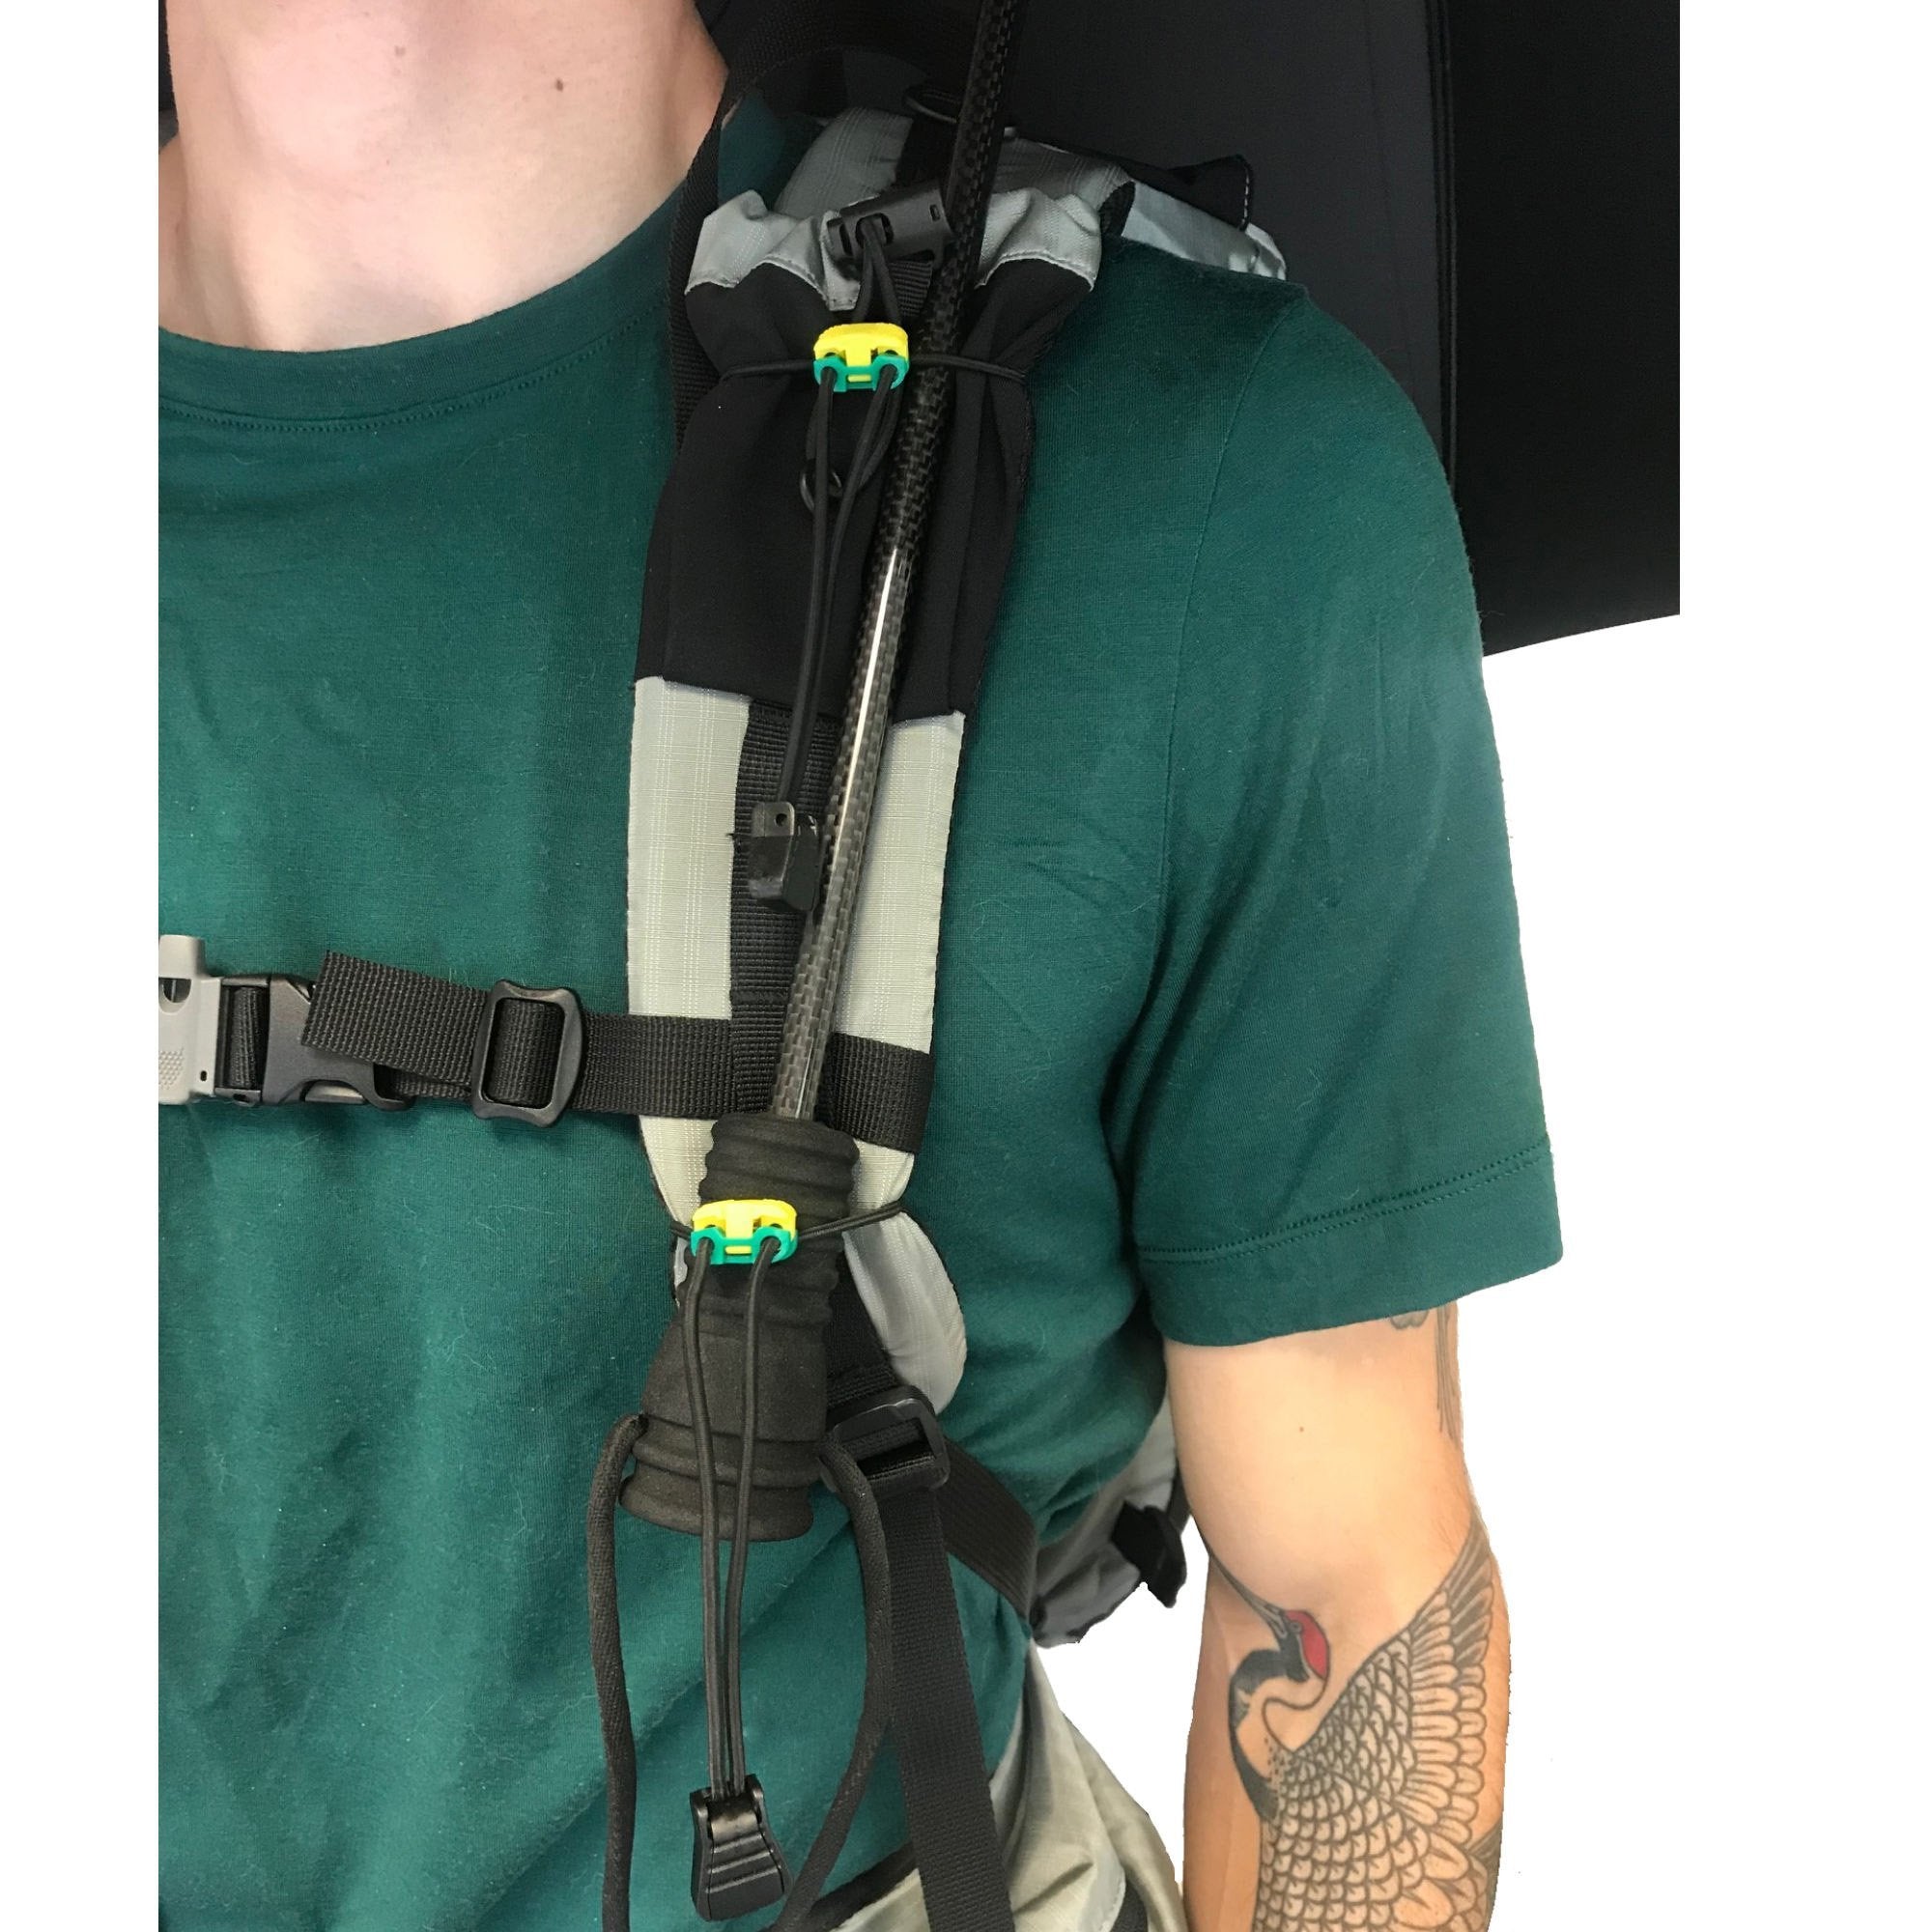 Hands Free Umbrella Kit on a shoulder strap being worn by a person